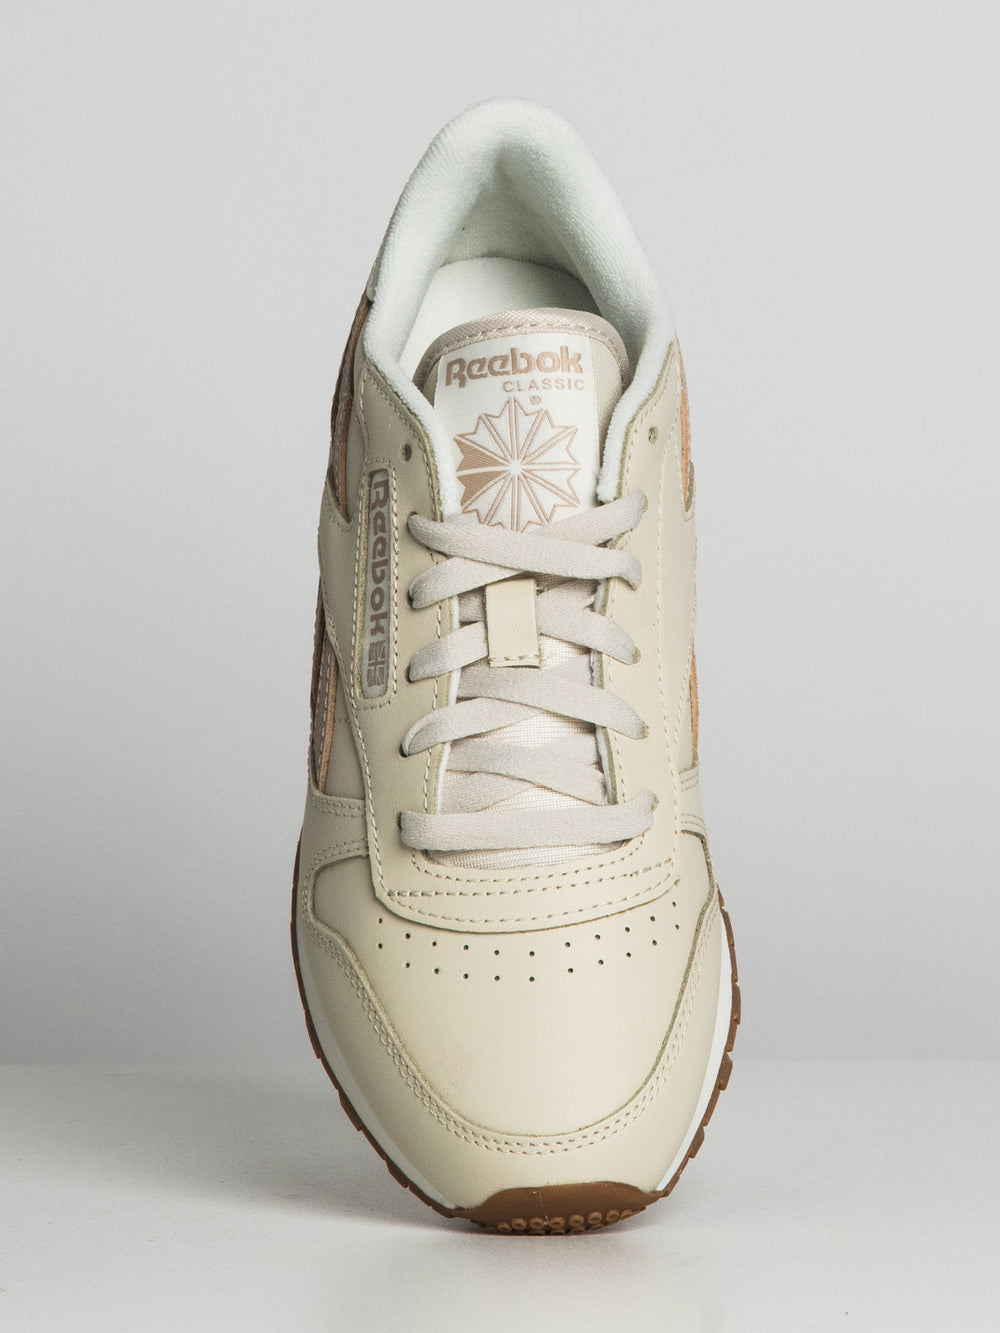 Footwear CLASSIC LEATHER REEBOK Collective WOMENS | Boathouse